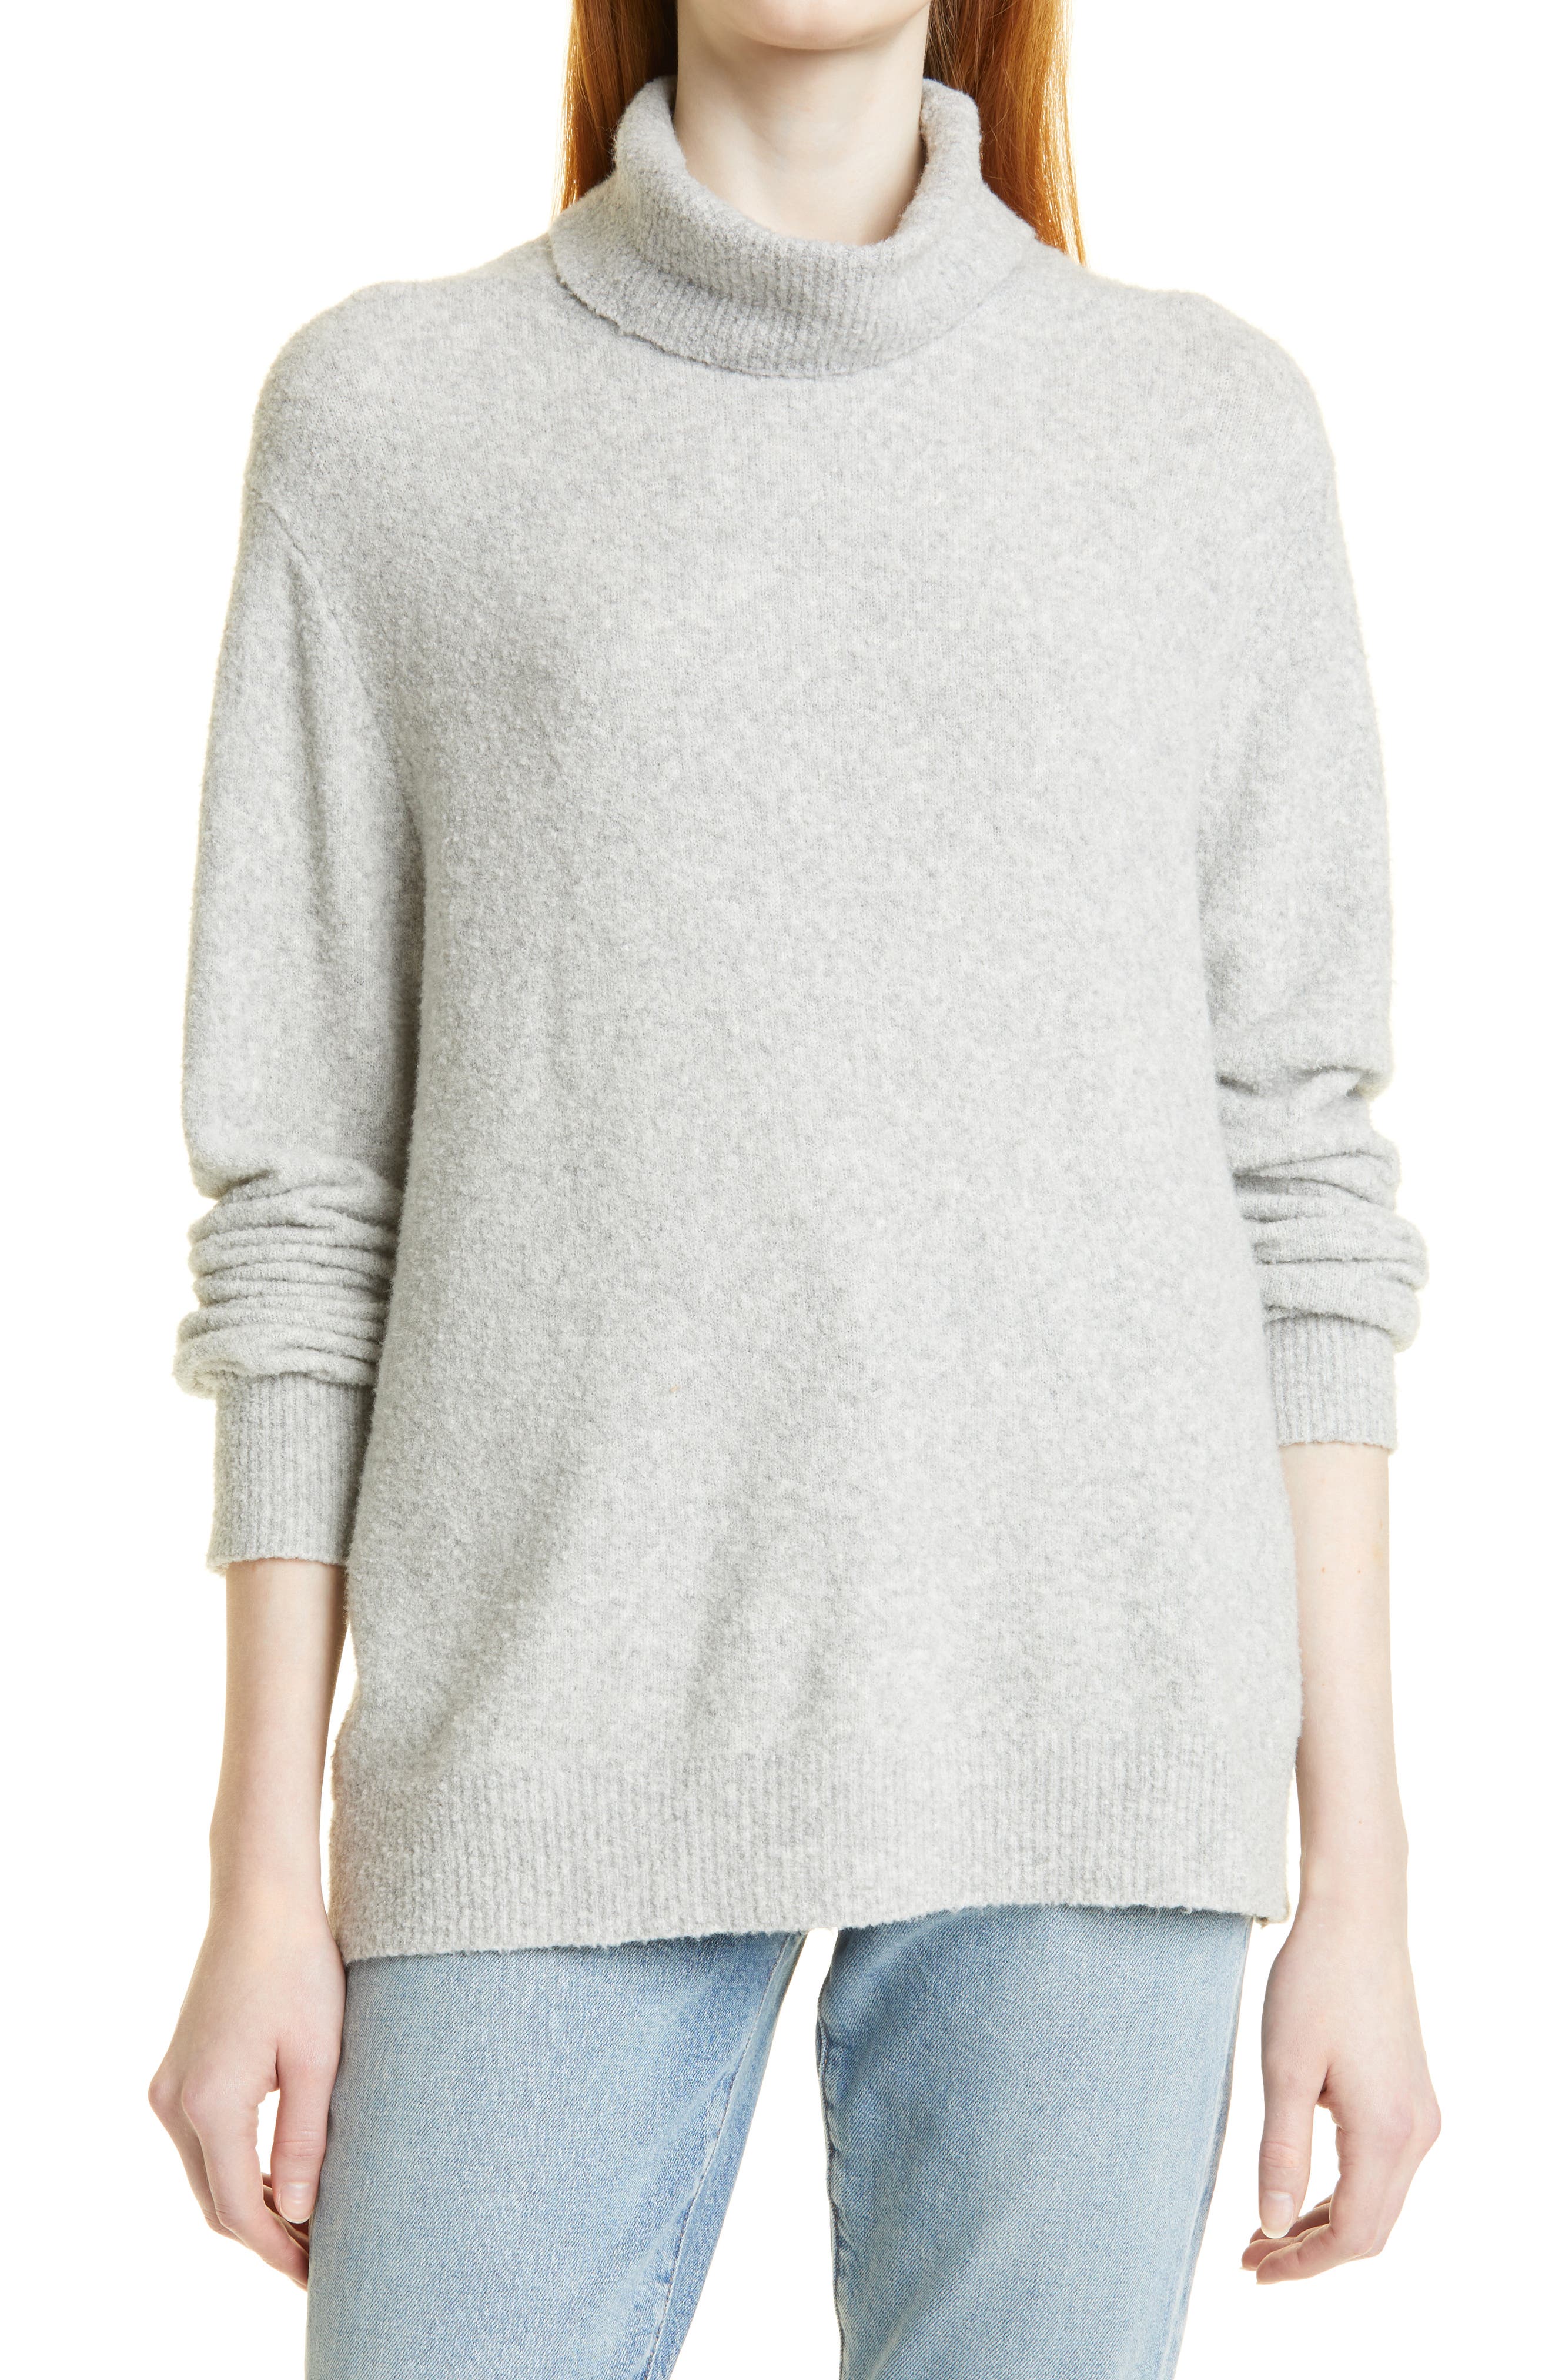 LINE Audra Cowl Neck Sweater in Heather Grey at Nordstrom